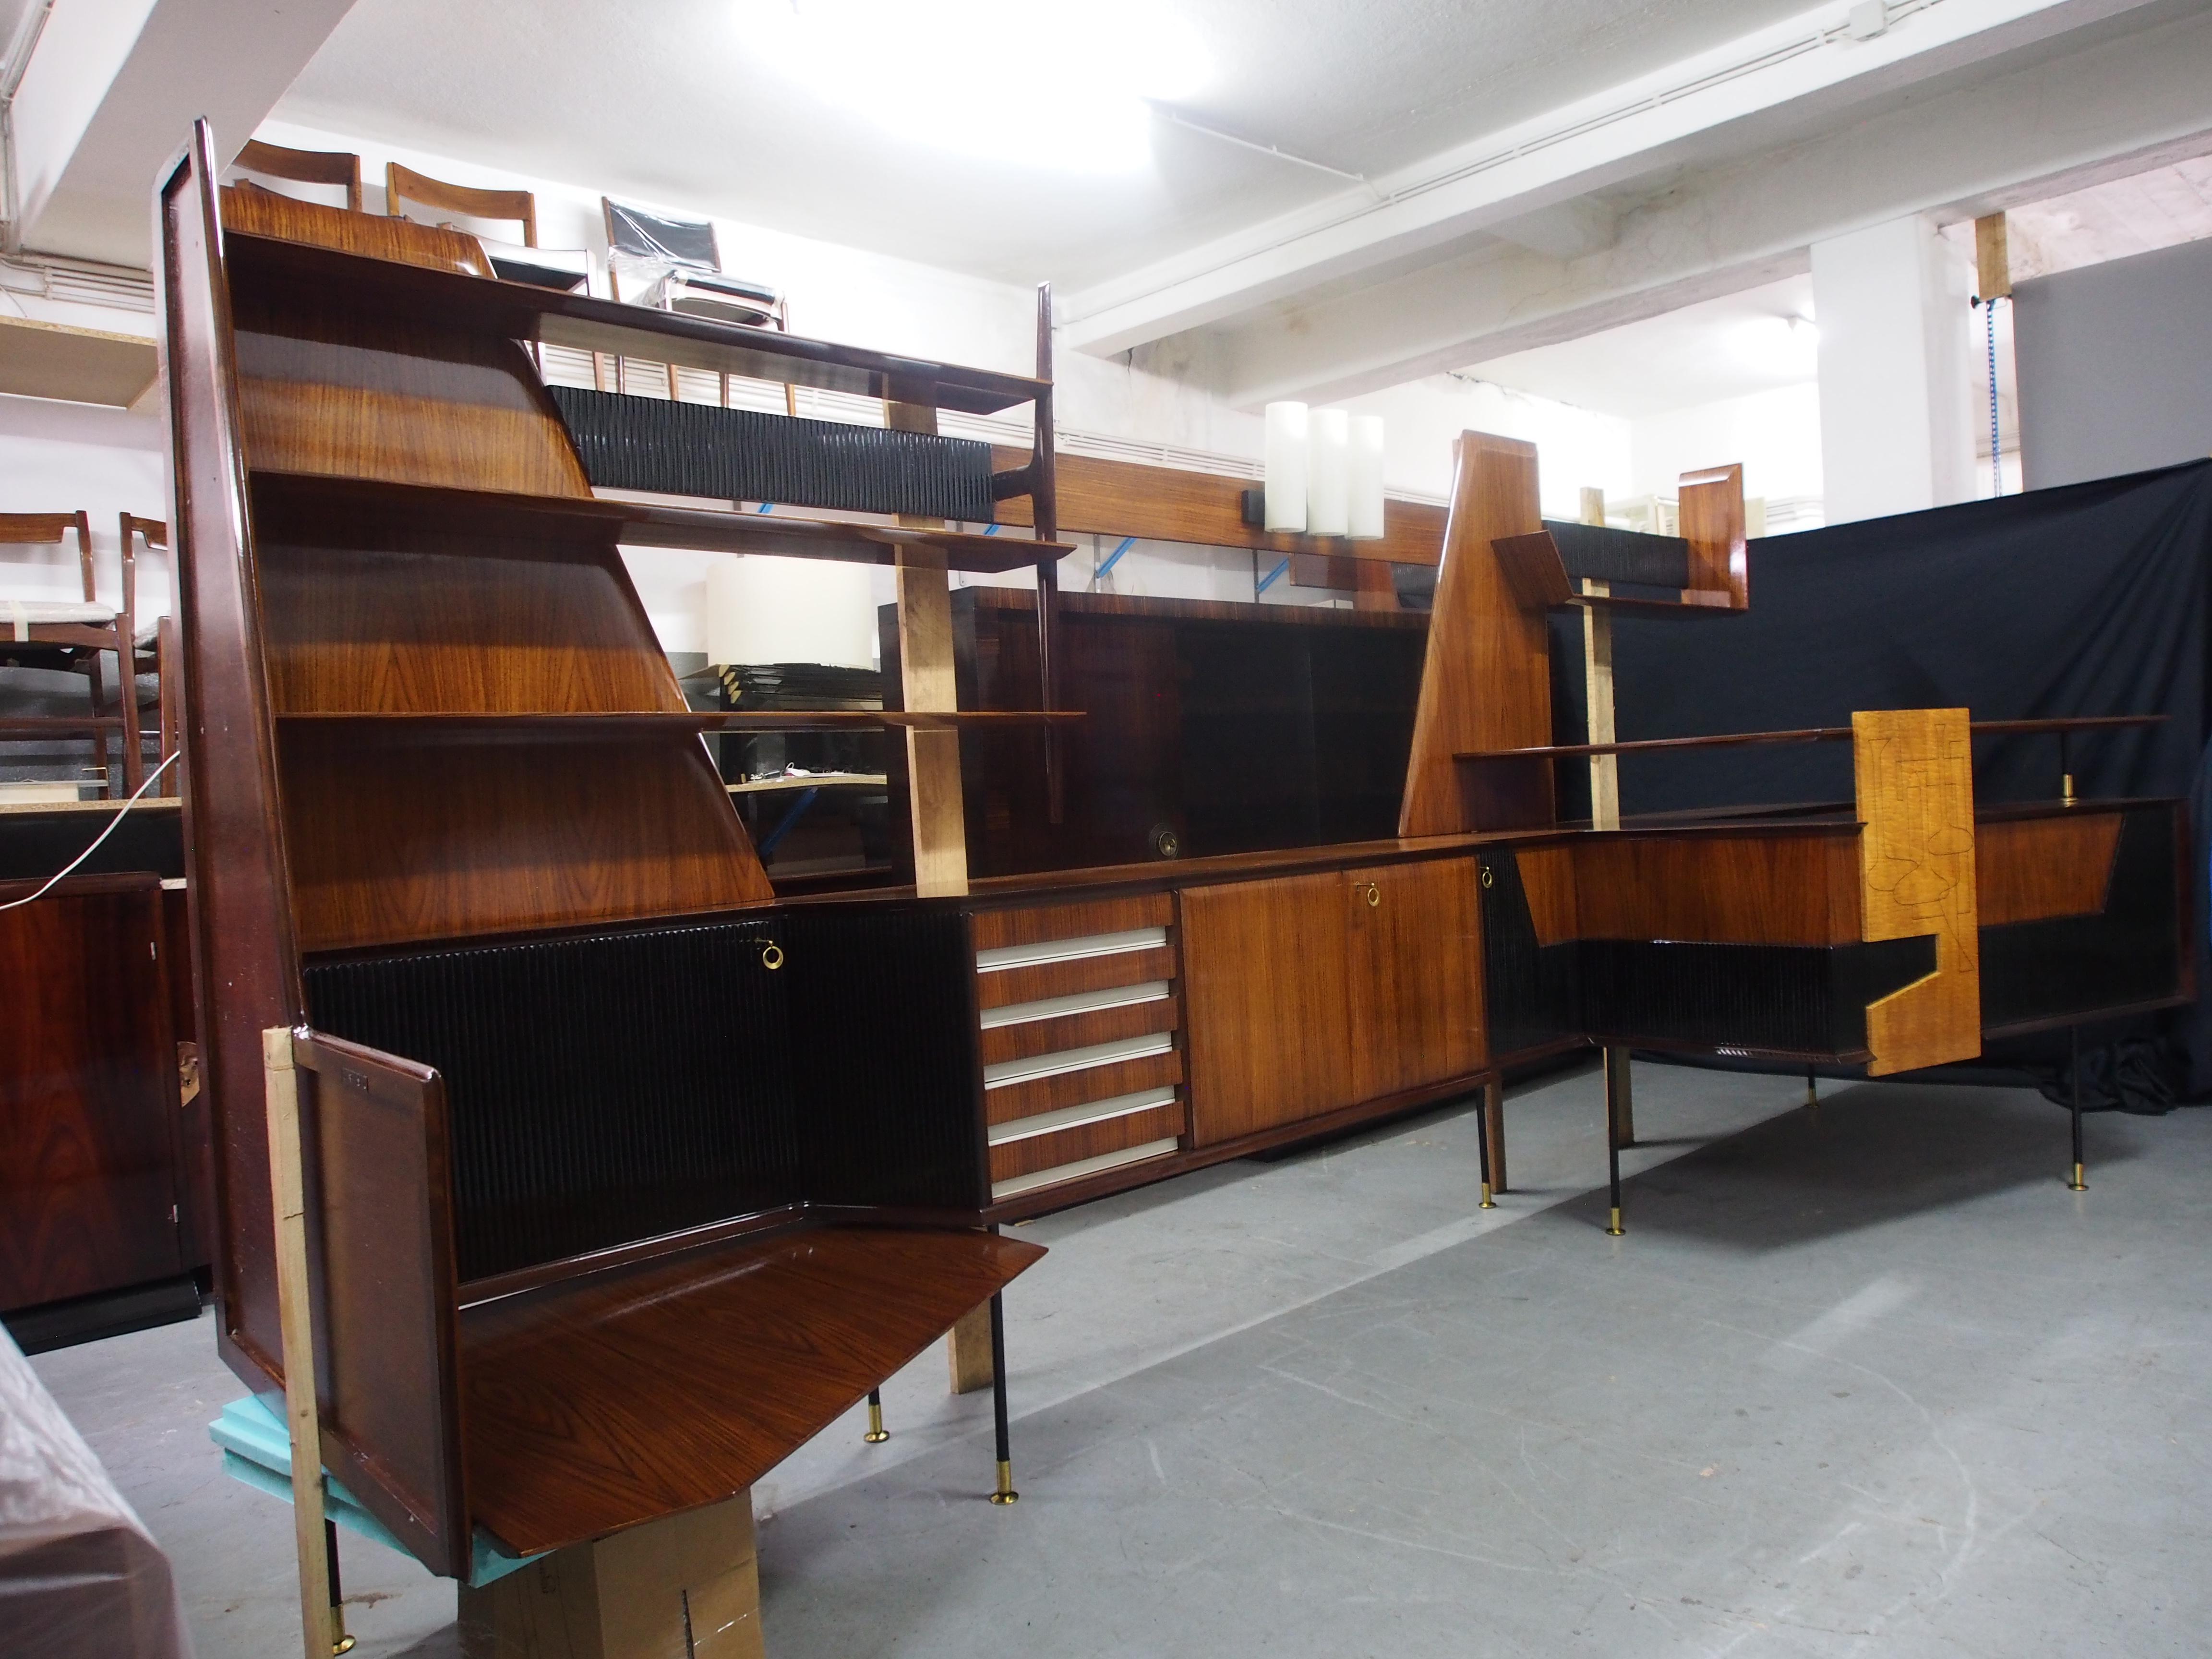 Large rosewood wall unit/dry bar by Vittorio Dassi, made in Italy in the 1950's.
Beautifully made in rosewood, ebanized wood and satinwood, details in brass, It has lots of display area and storage area, it has also a serving glass counter.
Amazing